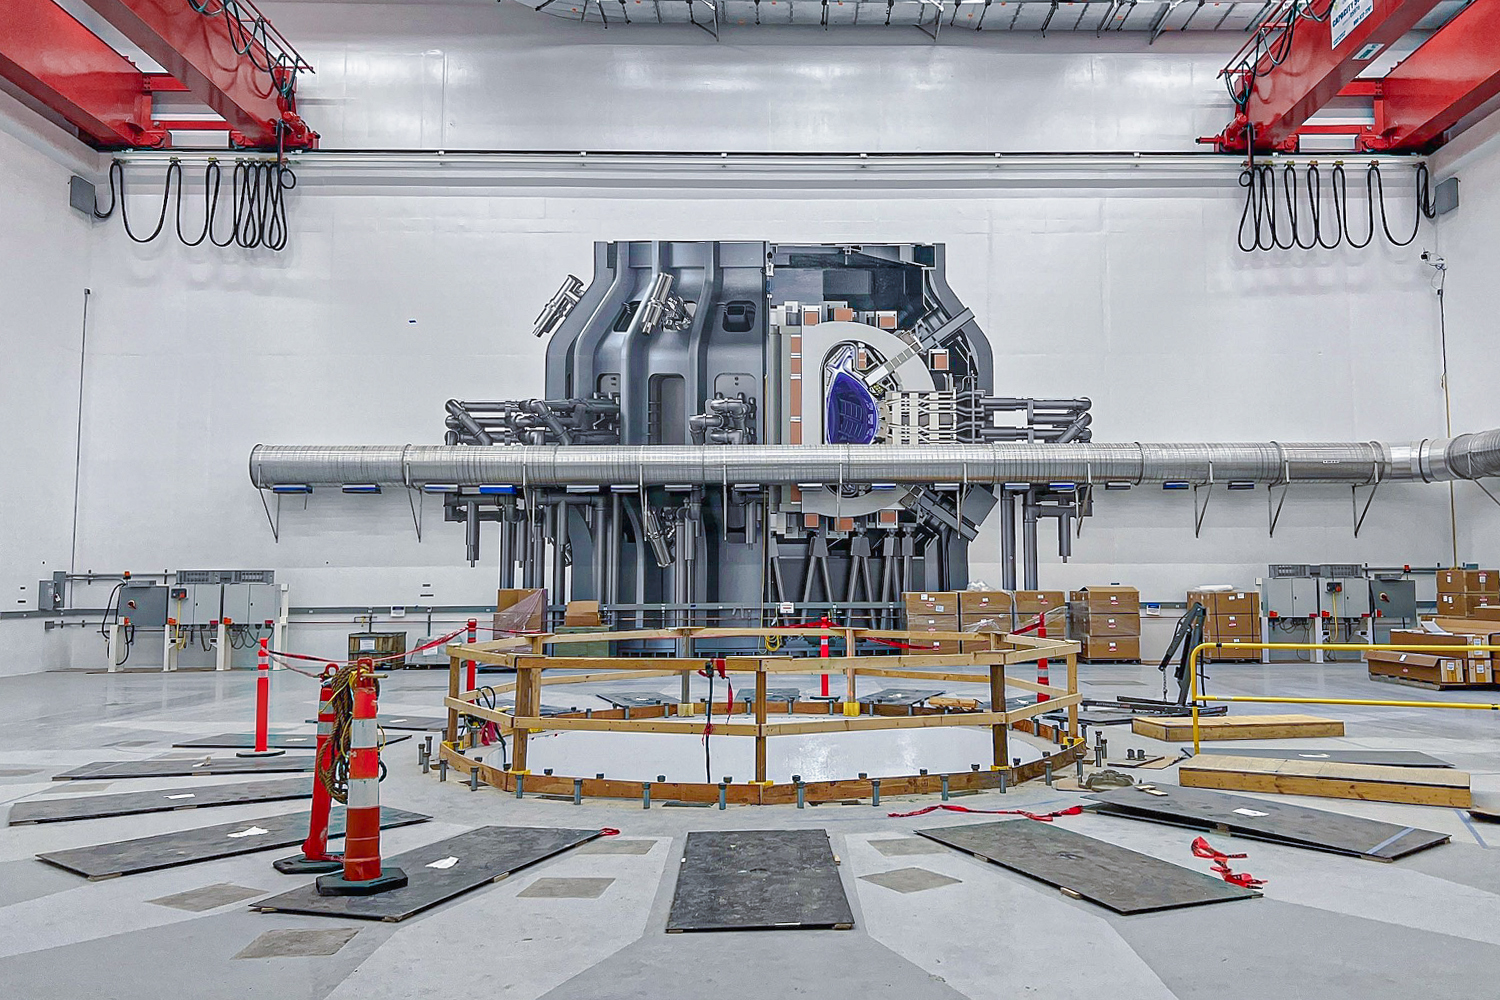 Inside a nuclear fusion facility that is being constructed. There is a large hole in the concrete floor where the reactor will eventually go, and a drawing of the reactor on the wall opposite the hole.